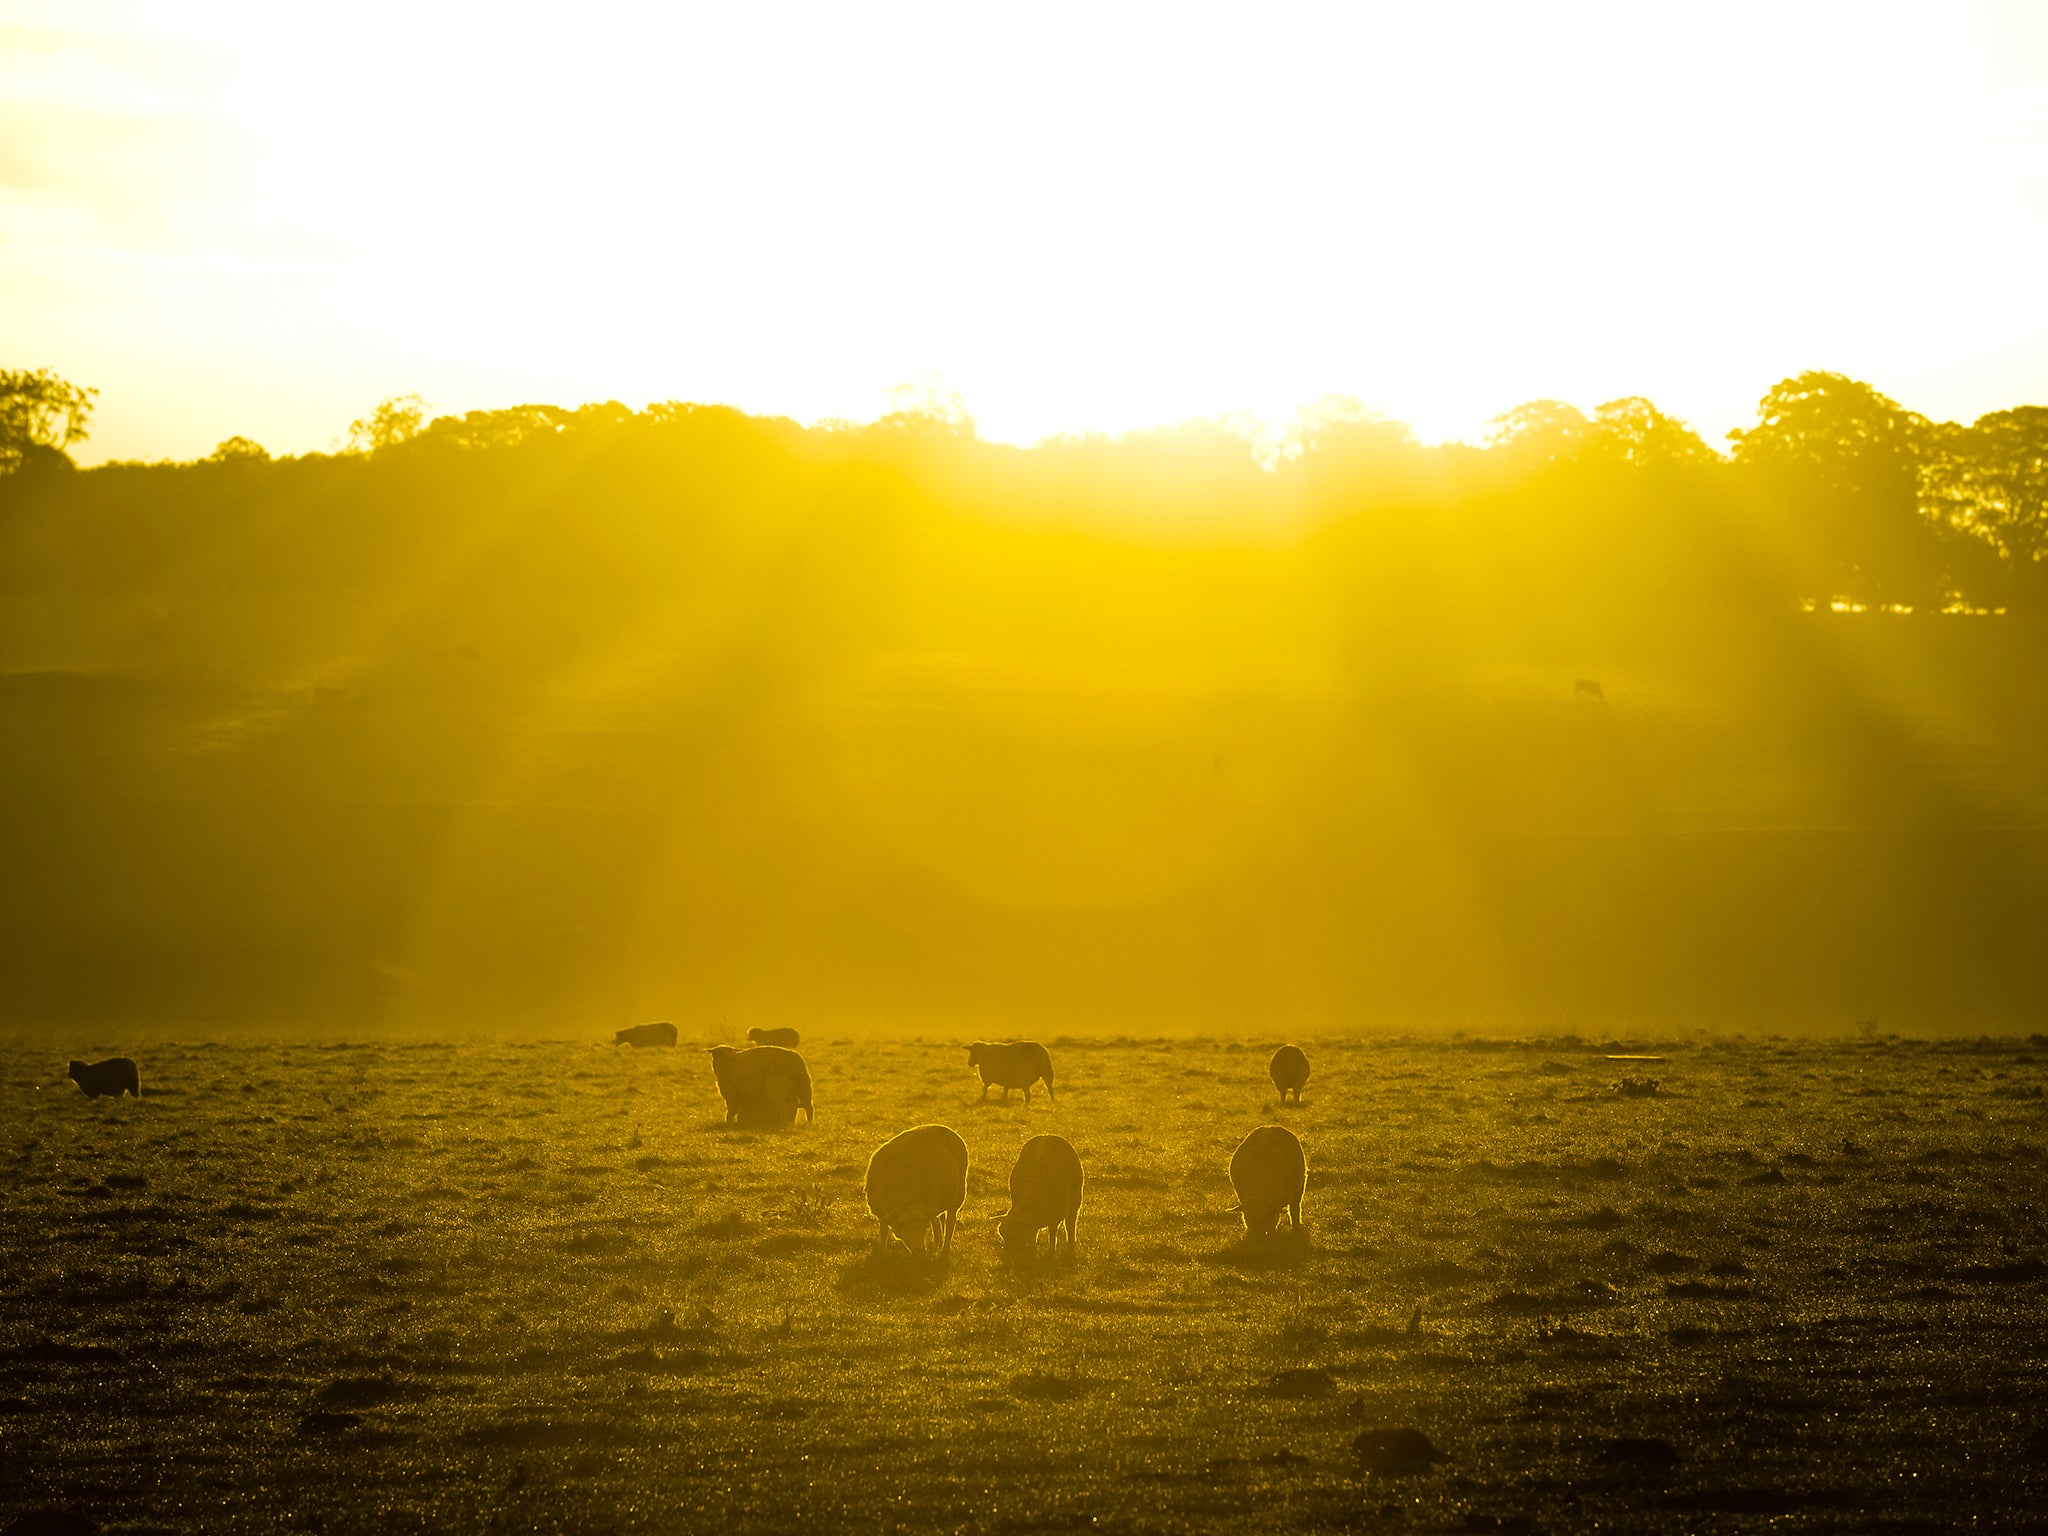 Early morning sunlight warms sheep as they graze in a field